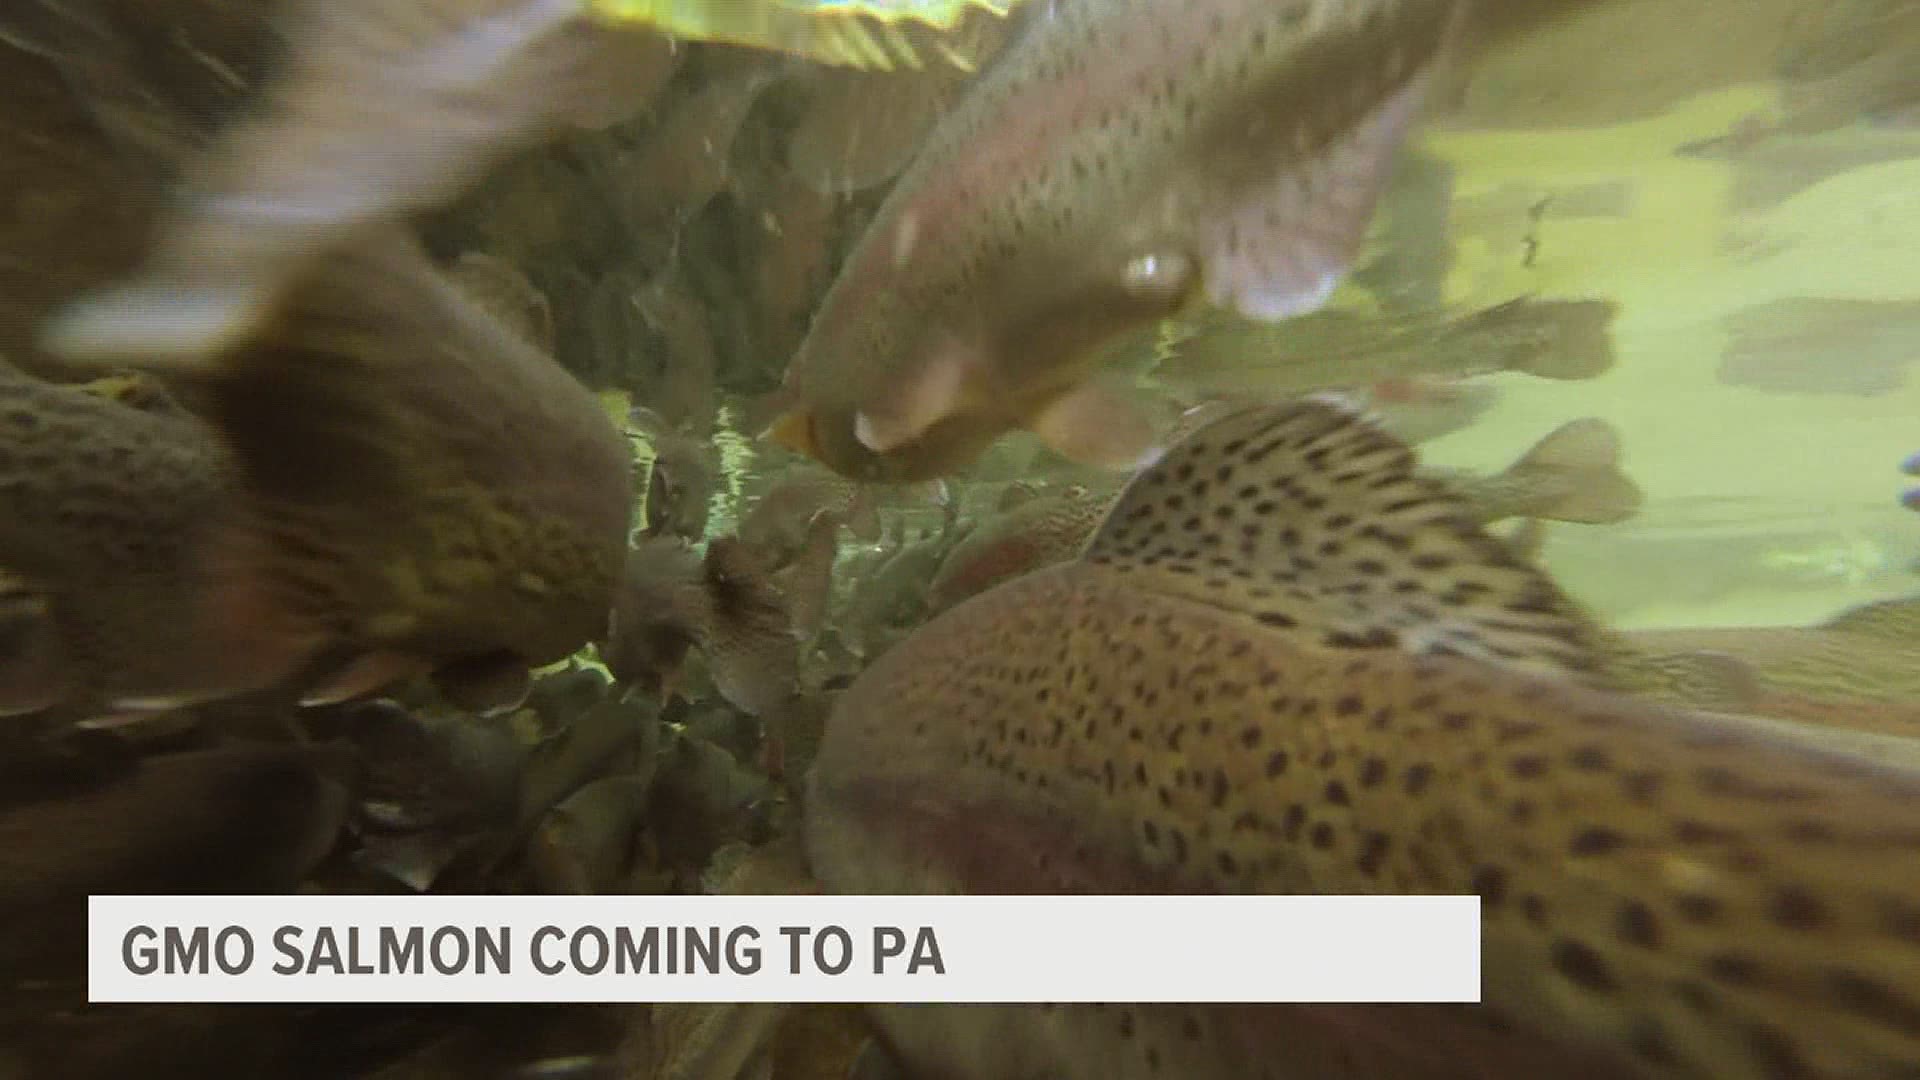 Biotech company Aqua Bounty plans to sell five metric tons of fish after their harvest later this month